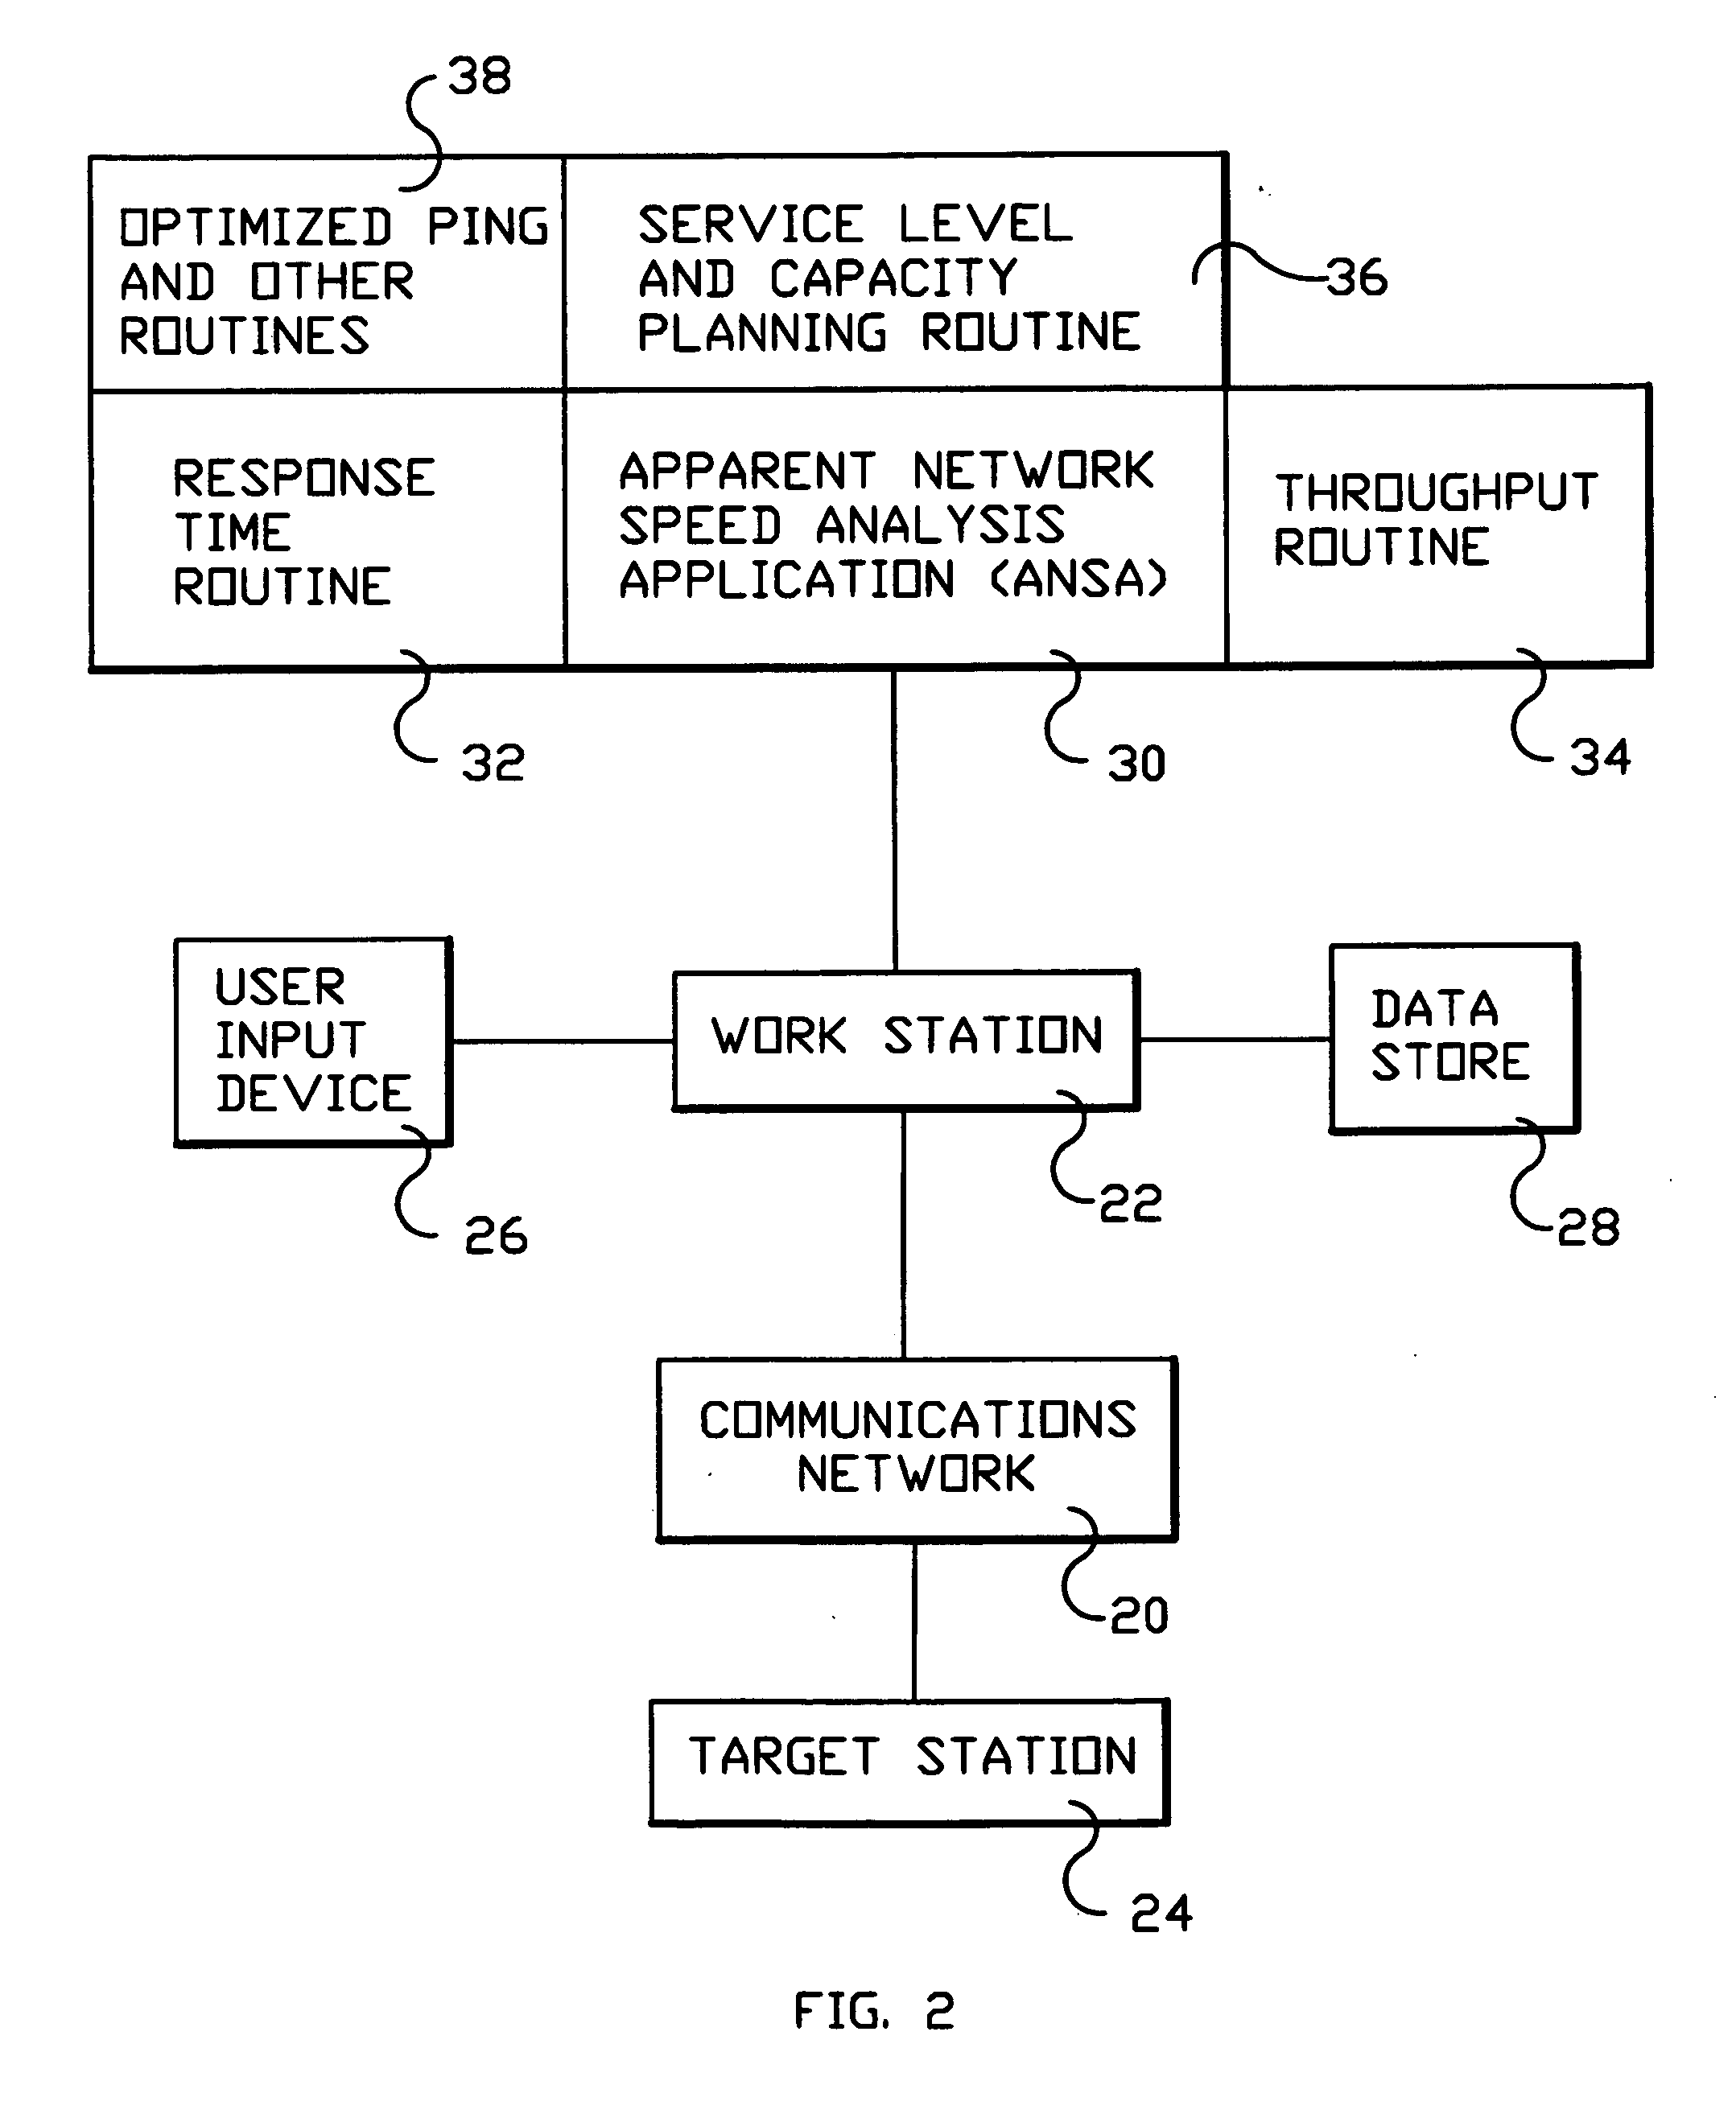 System and method for monitoring performance, analyzing capacity and utilization, and planning capacity for networks and intelligent, network connected processes